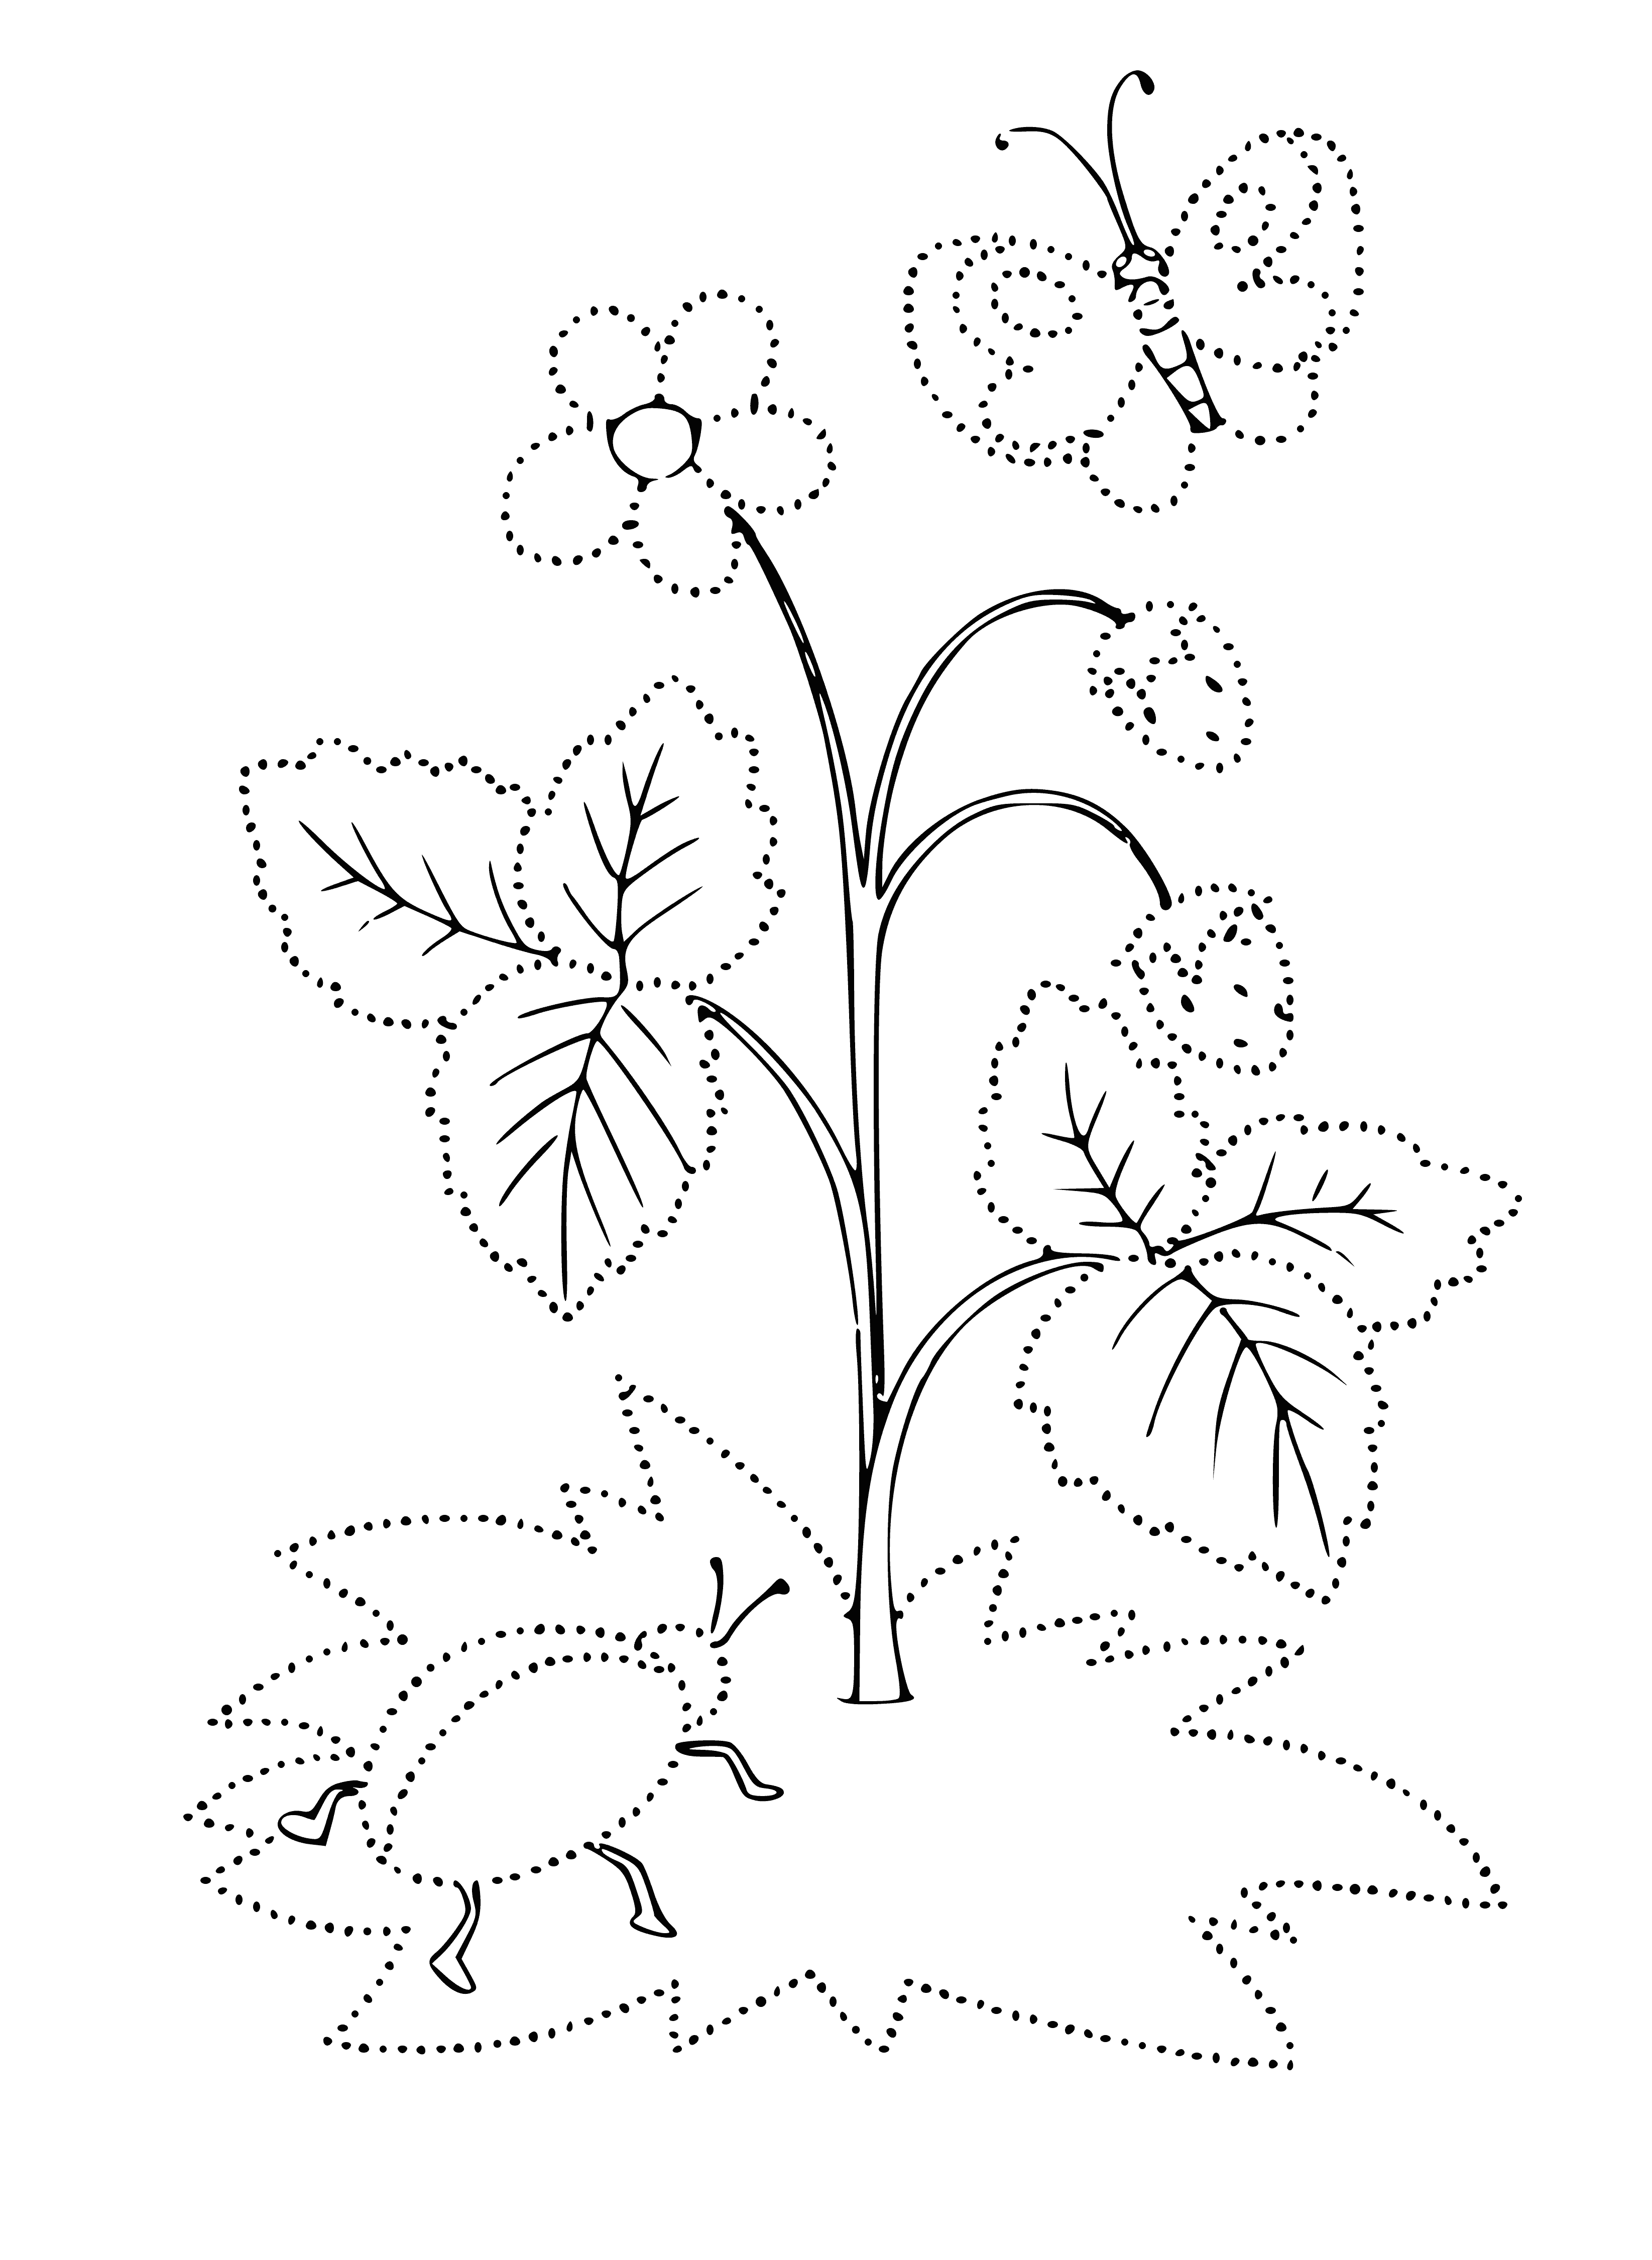 coloring page: Color a large red strawberry w/ seeds & green leaves on stem against white background.